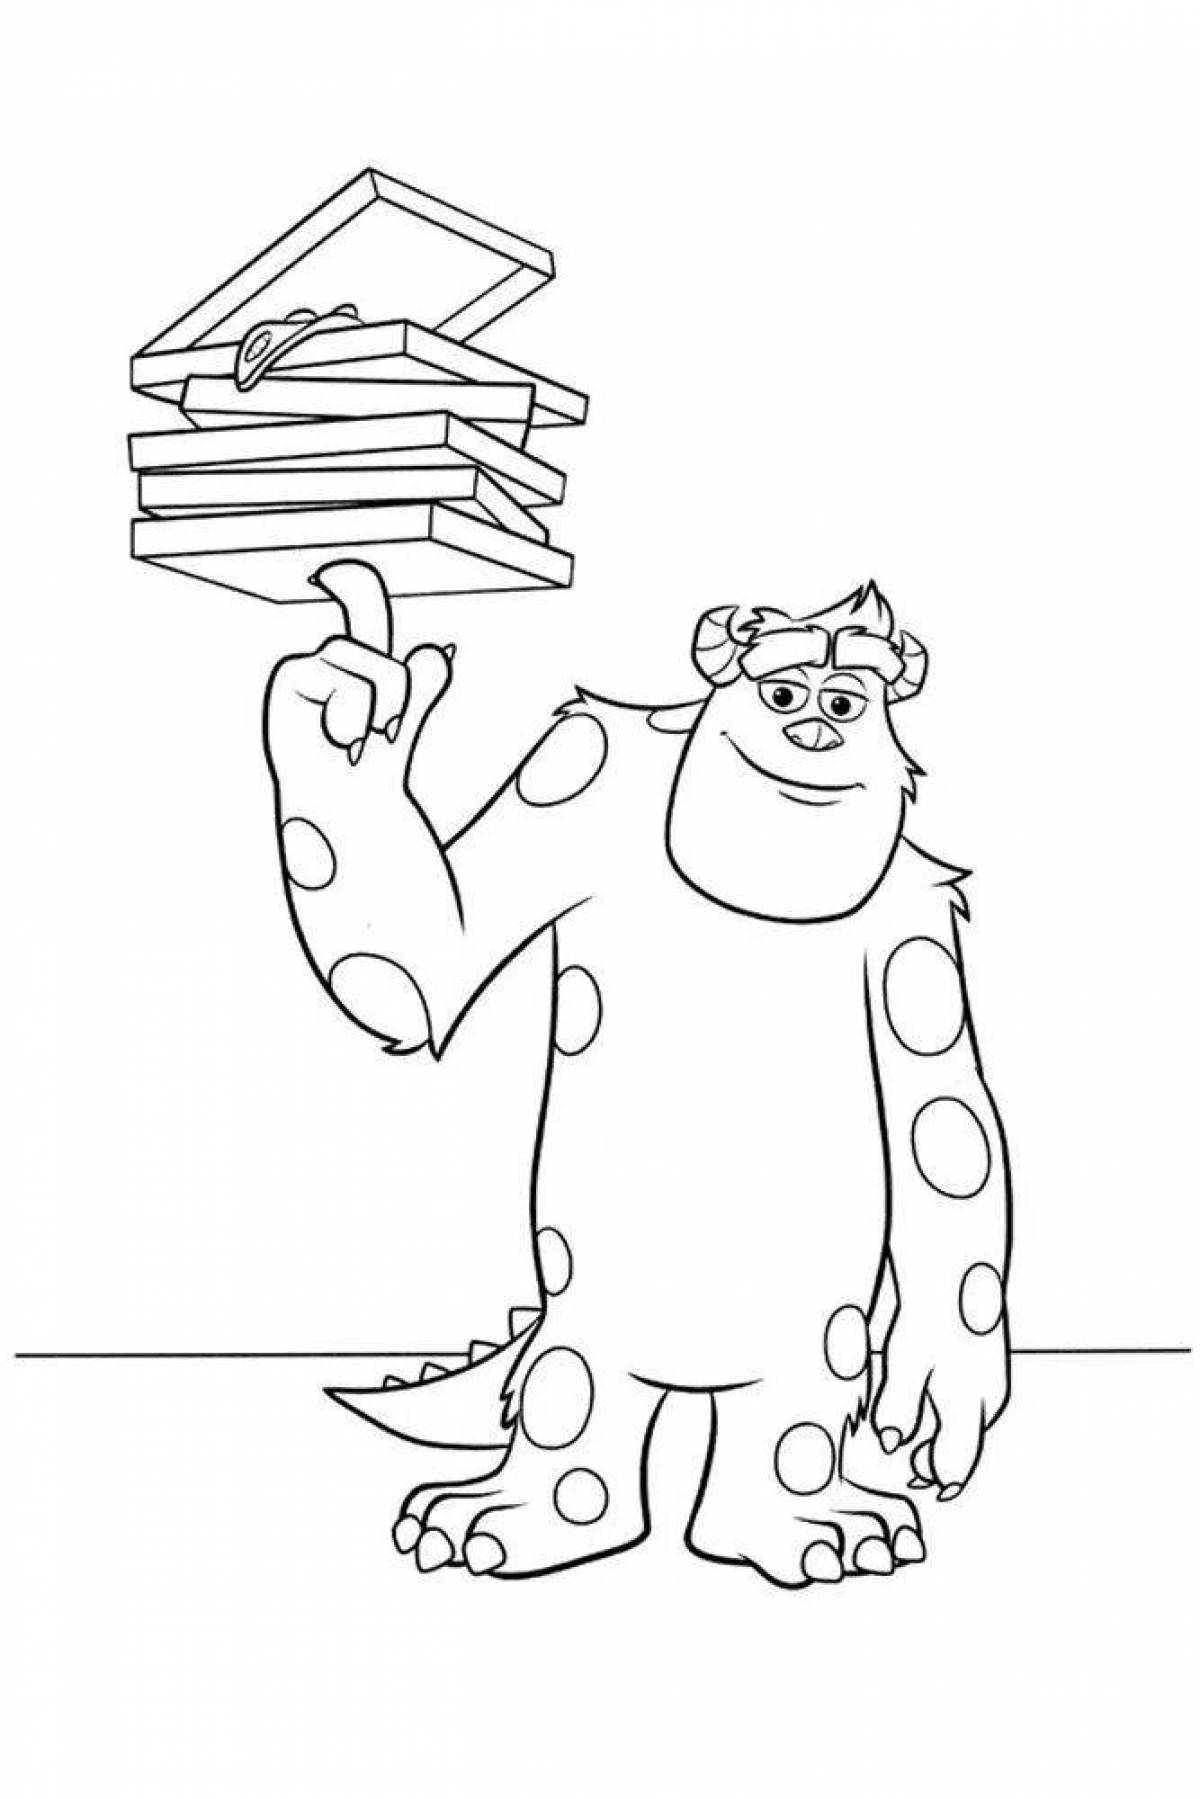 Crazy Monsters University coloring page